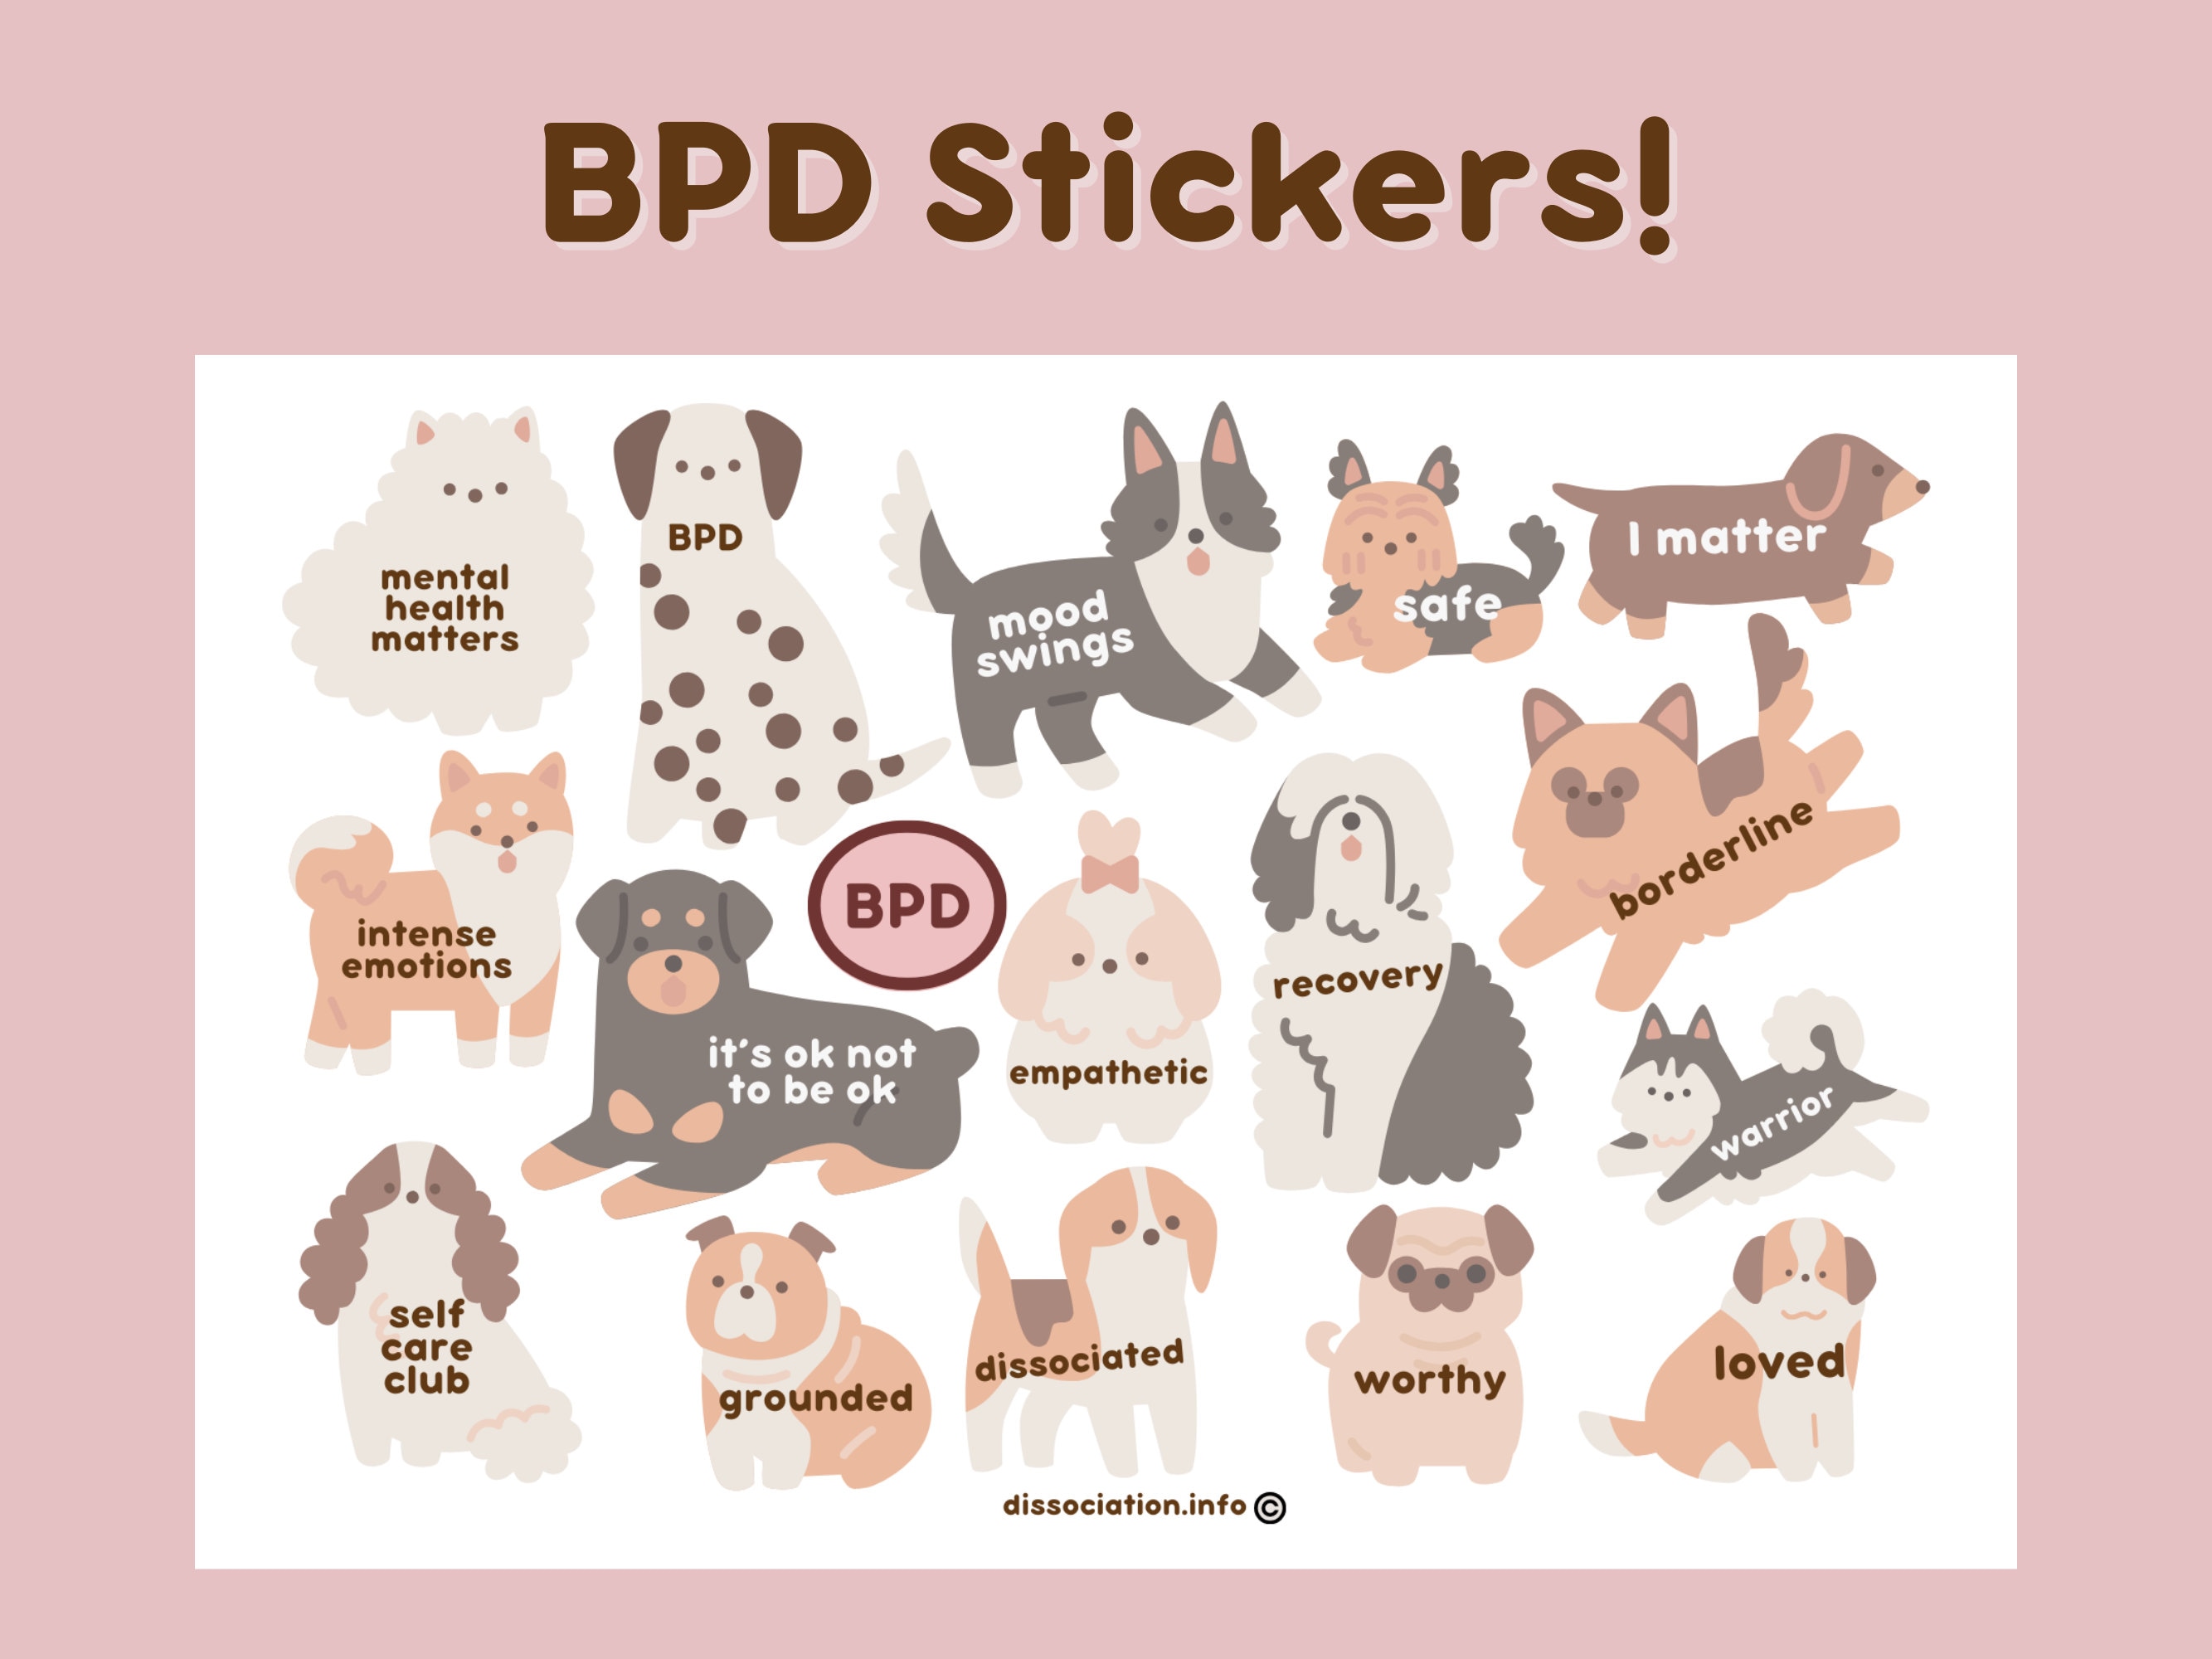 BPD (Borderline Personality Disorder) is NOT a Synonym for Crazy ~ Mental  Health Awareness ~ Stop the Stigma  Sticker for Sale by waycourtfeels